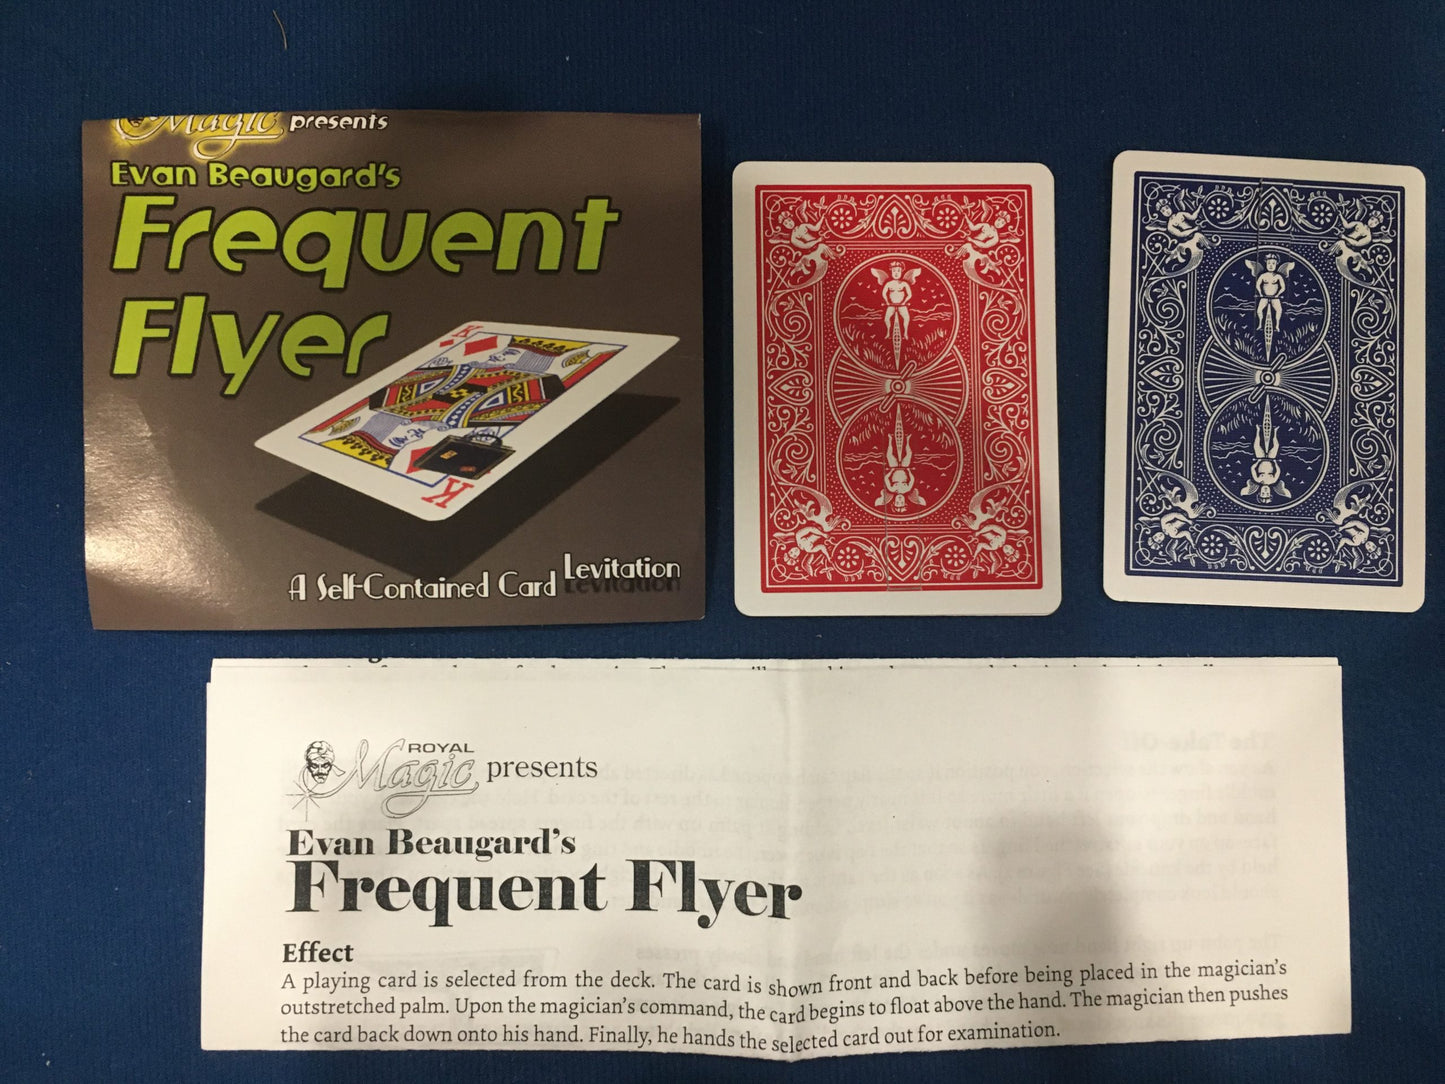 Frequent Flyer by Evan Beaugard, used